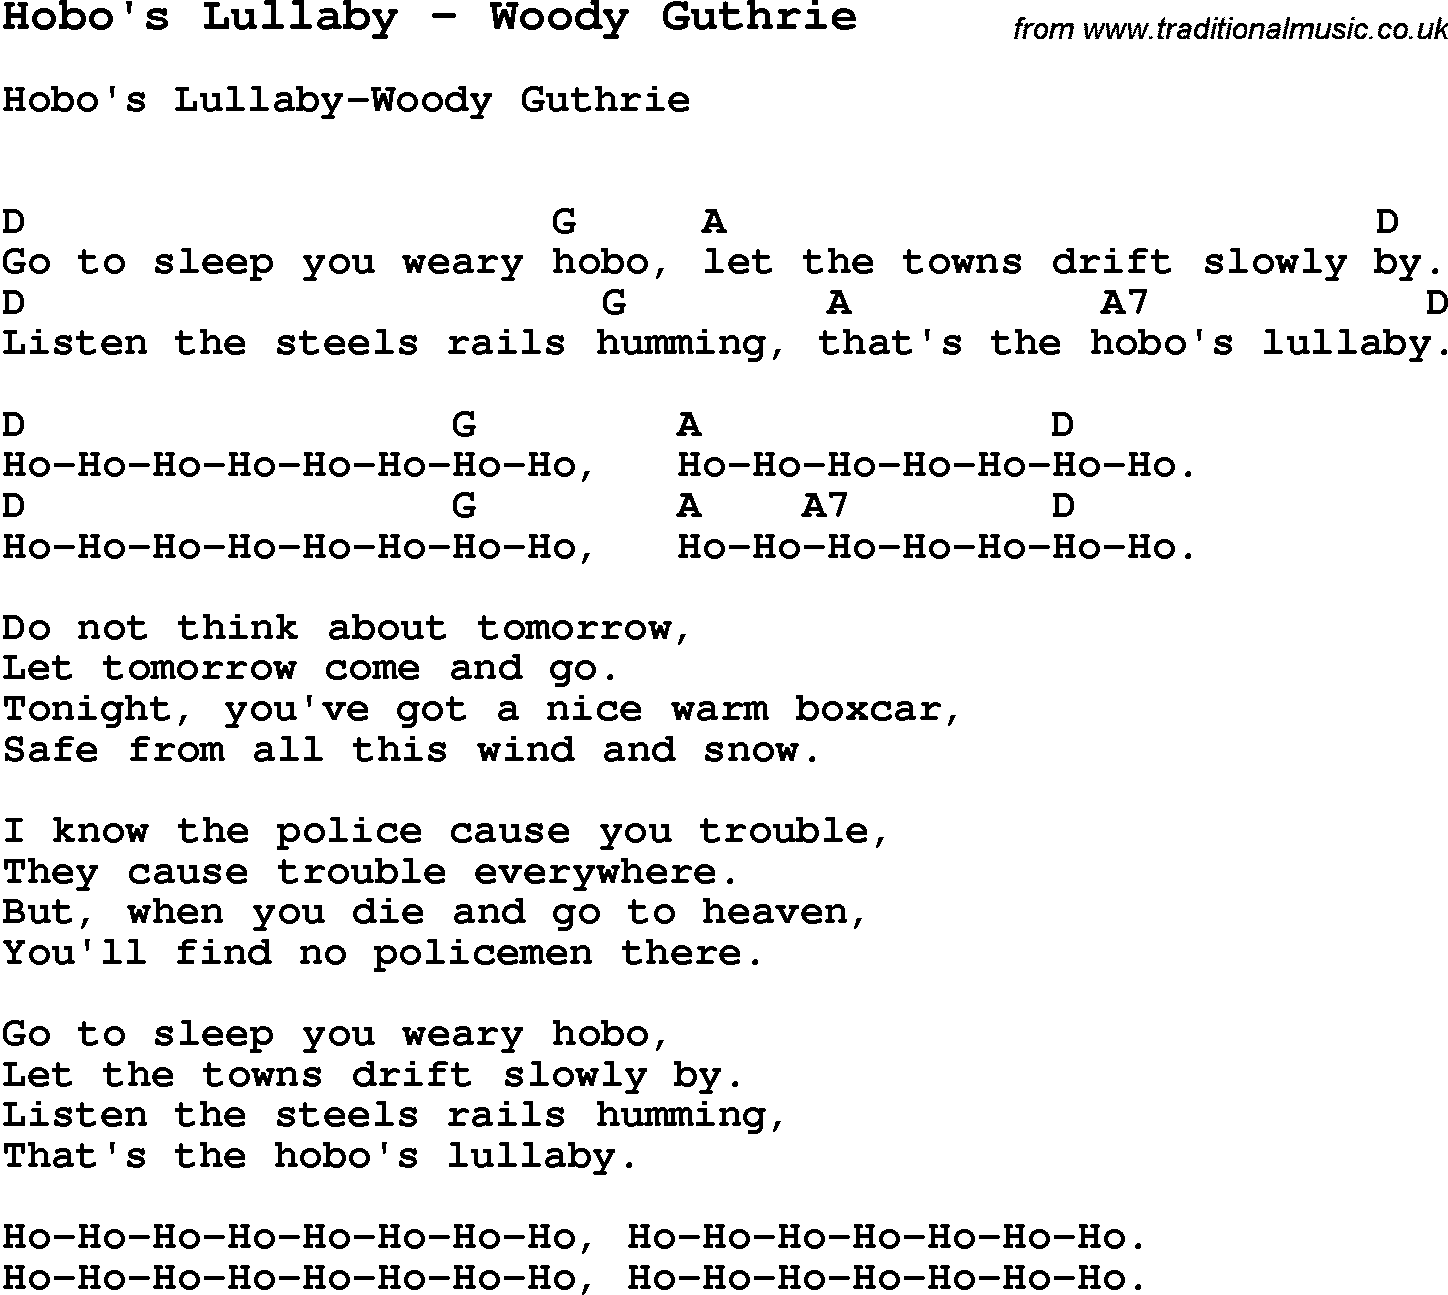 Song Hobo's Lullaby by Woody Guthrie, with lyrics for vocal performance and accompaniment chords for Ukulele, Guitar Banjo etc.